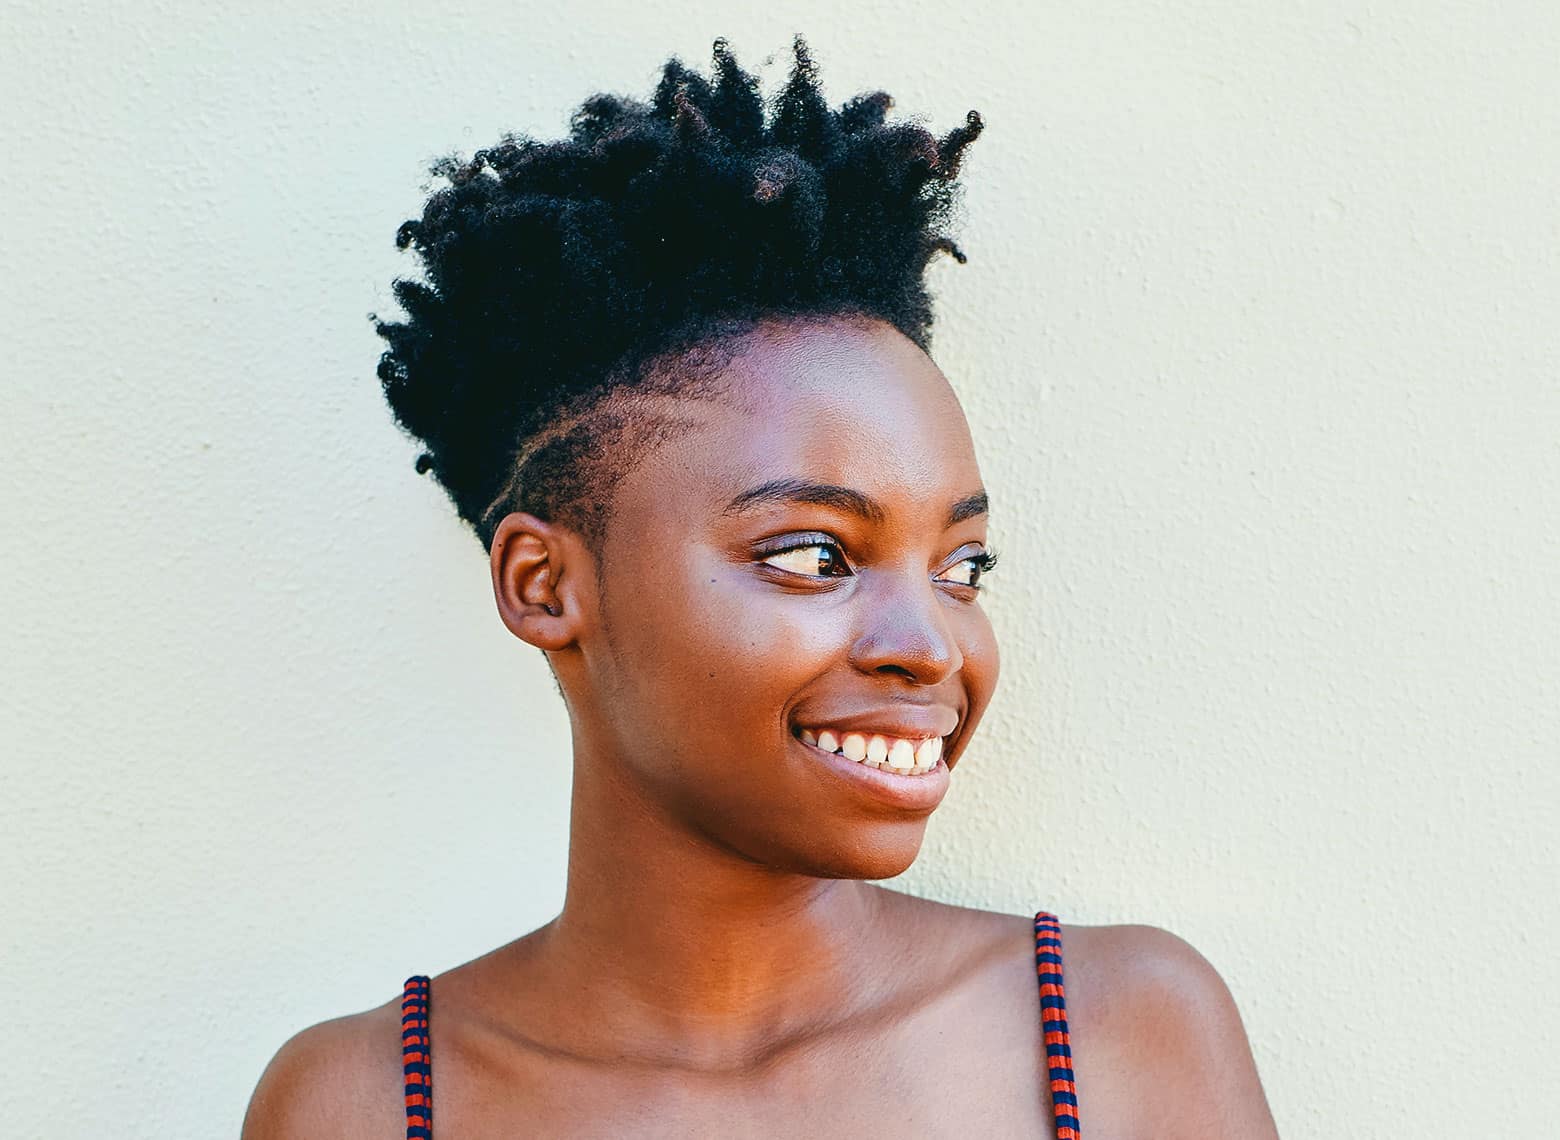 51 Short Natural Hairstyles to Upgrade Your Look This Year - StyleSeat